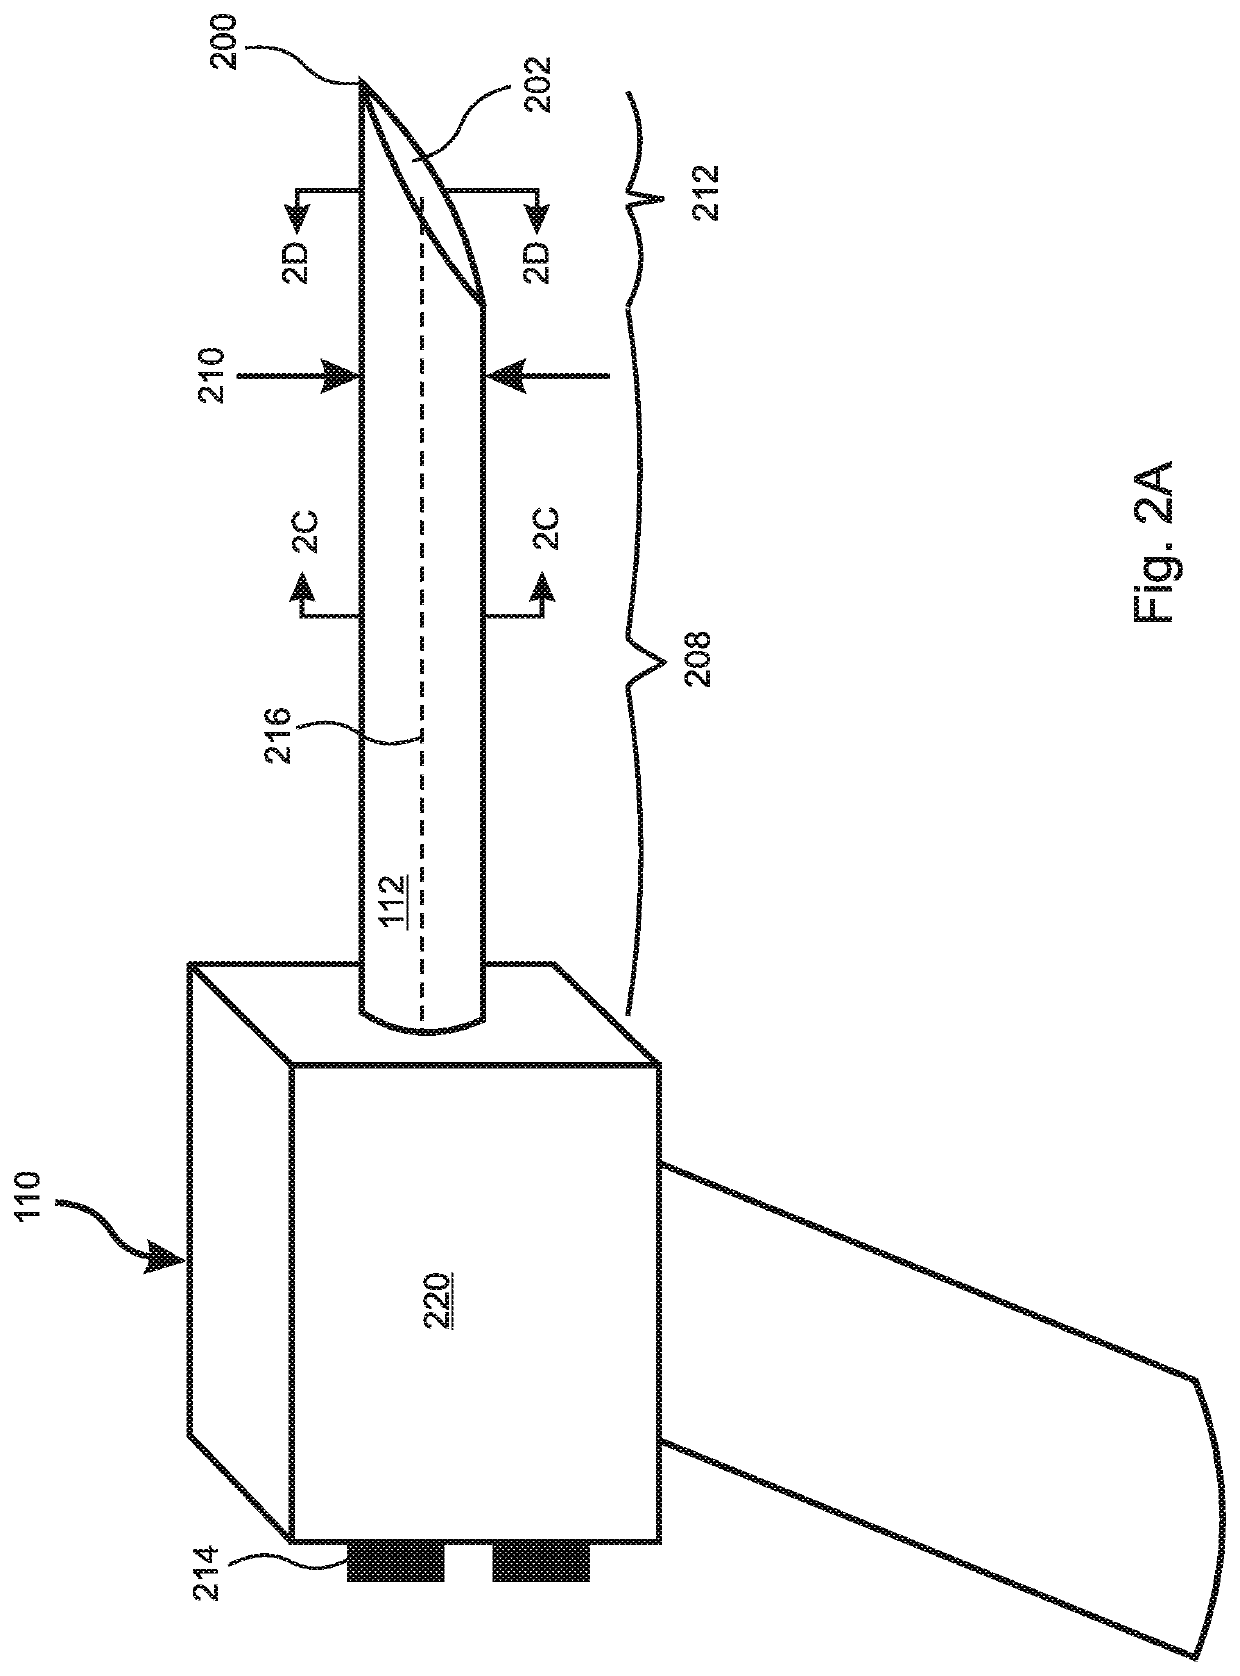 Insulation injection device